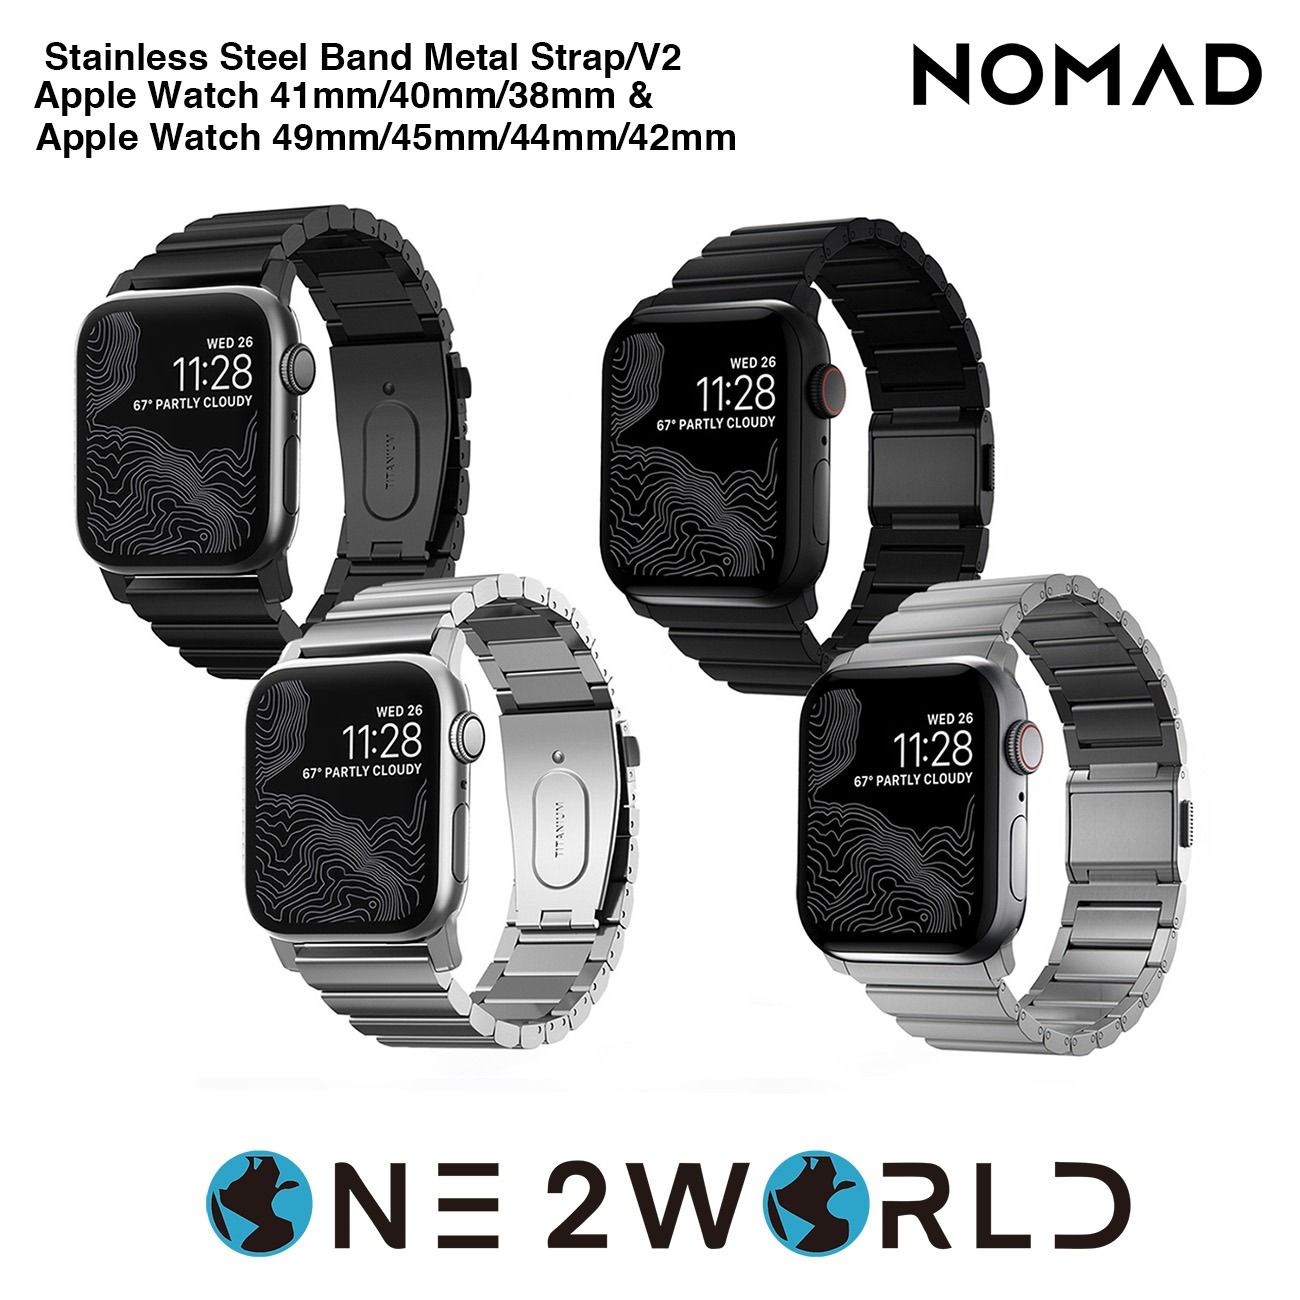 NOMAD Titanium Band Metal Strap | V2 for Apple Watch 41mm/40mm/38mm | 49mm/45mm/44mm/42mm,  Mobile Phones & Gadgets, Wearables & Smart Watches on Carousell